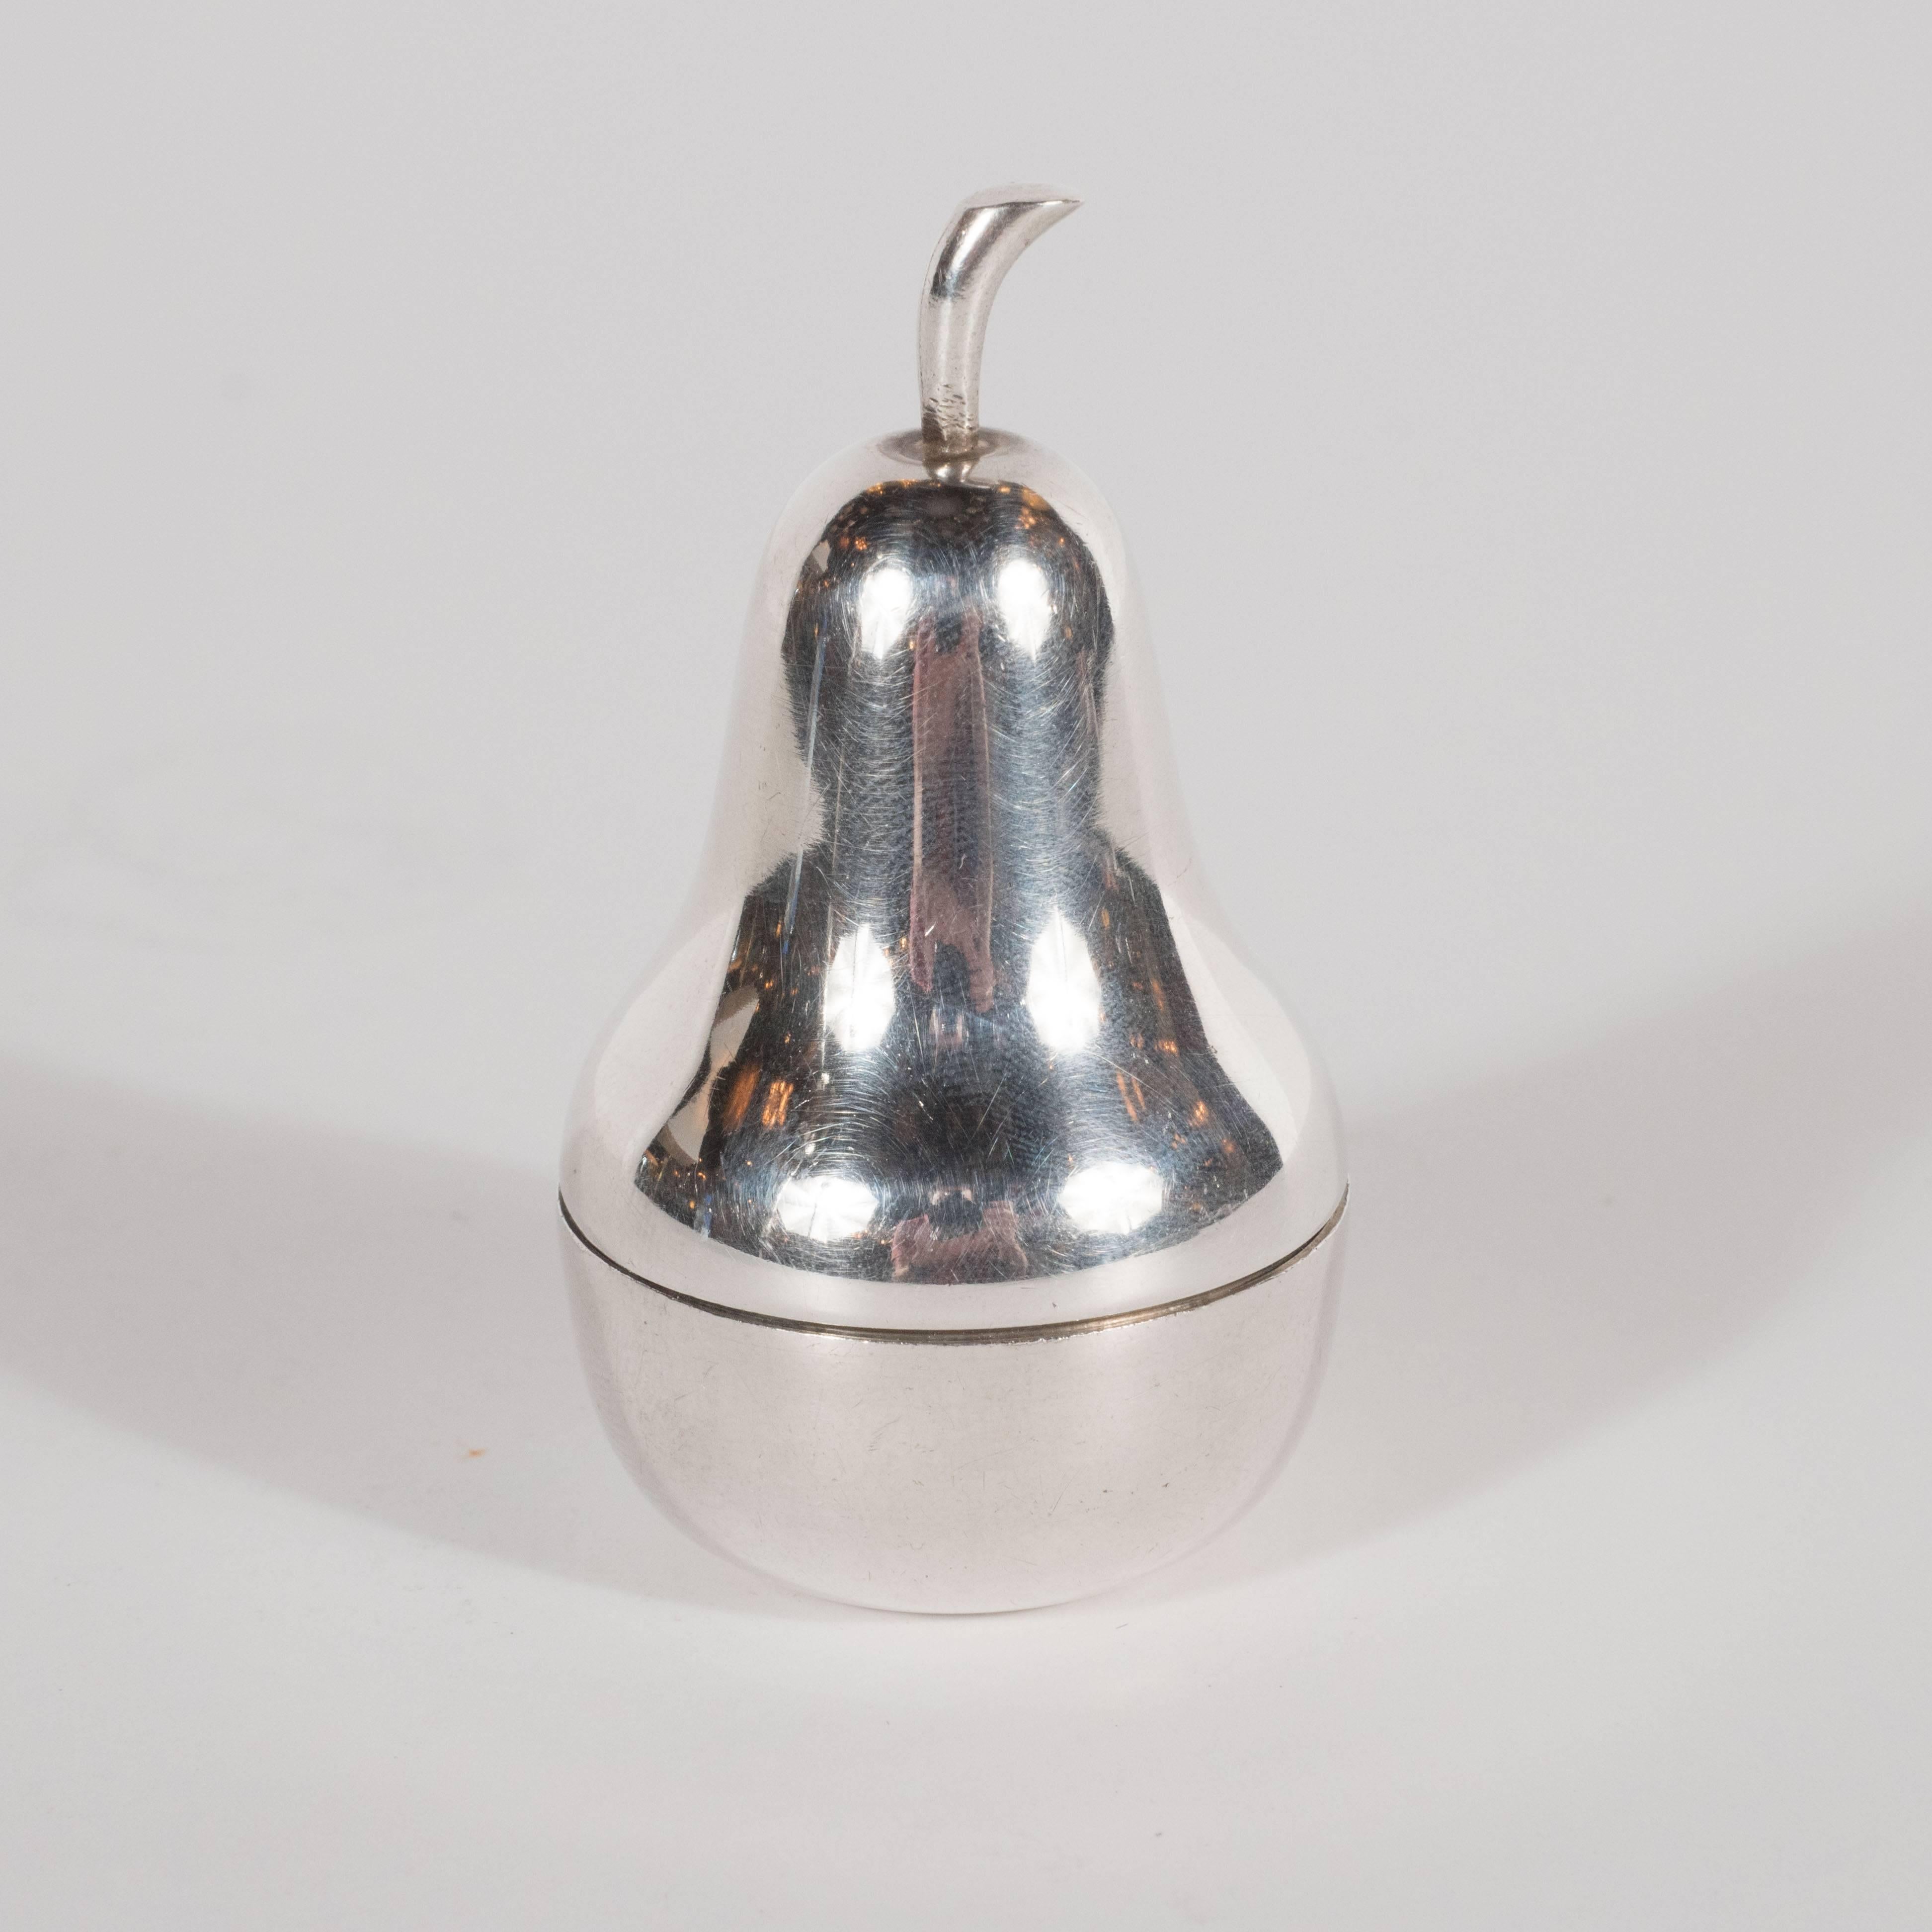 This chic sterling silver pear shaped pill box was realized by the fabled Tiffany & Co. the most revered name in American silver, circa 1960. With its clean flowing lines and impeccable surface, the quality of design and construction is apparent